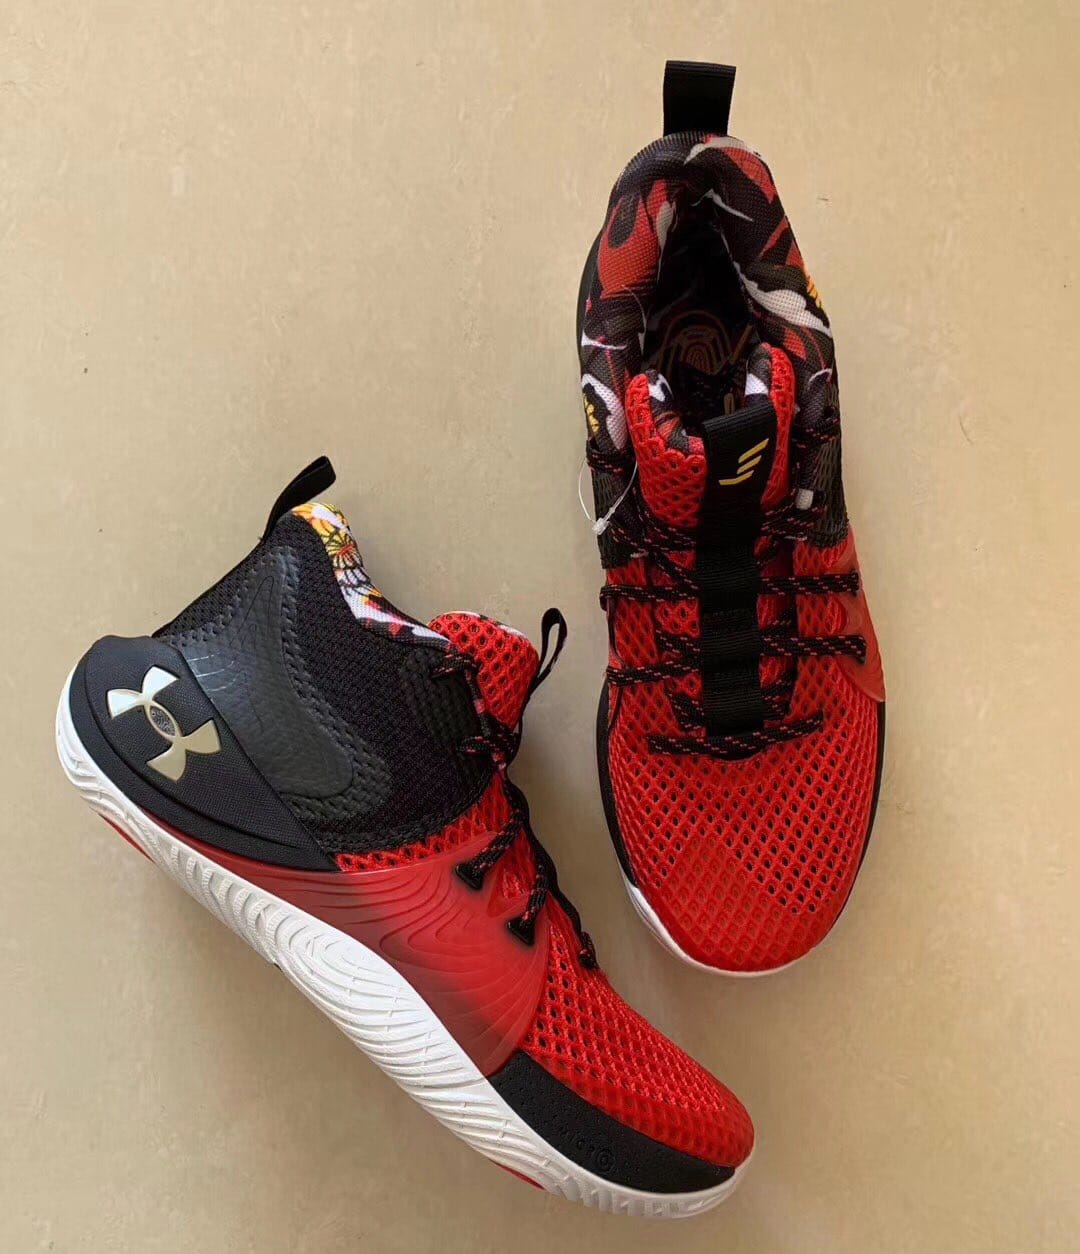 joel embiid shoes under armour